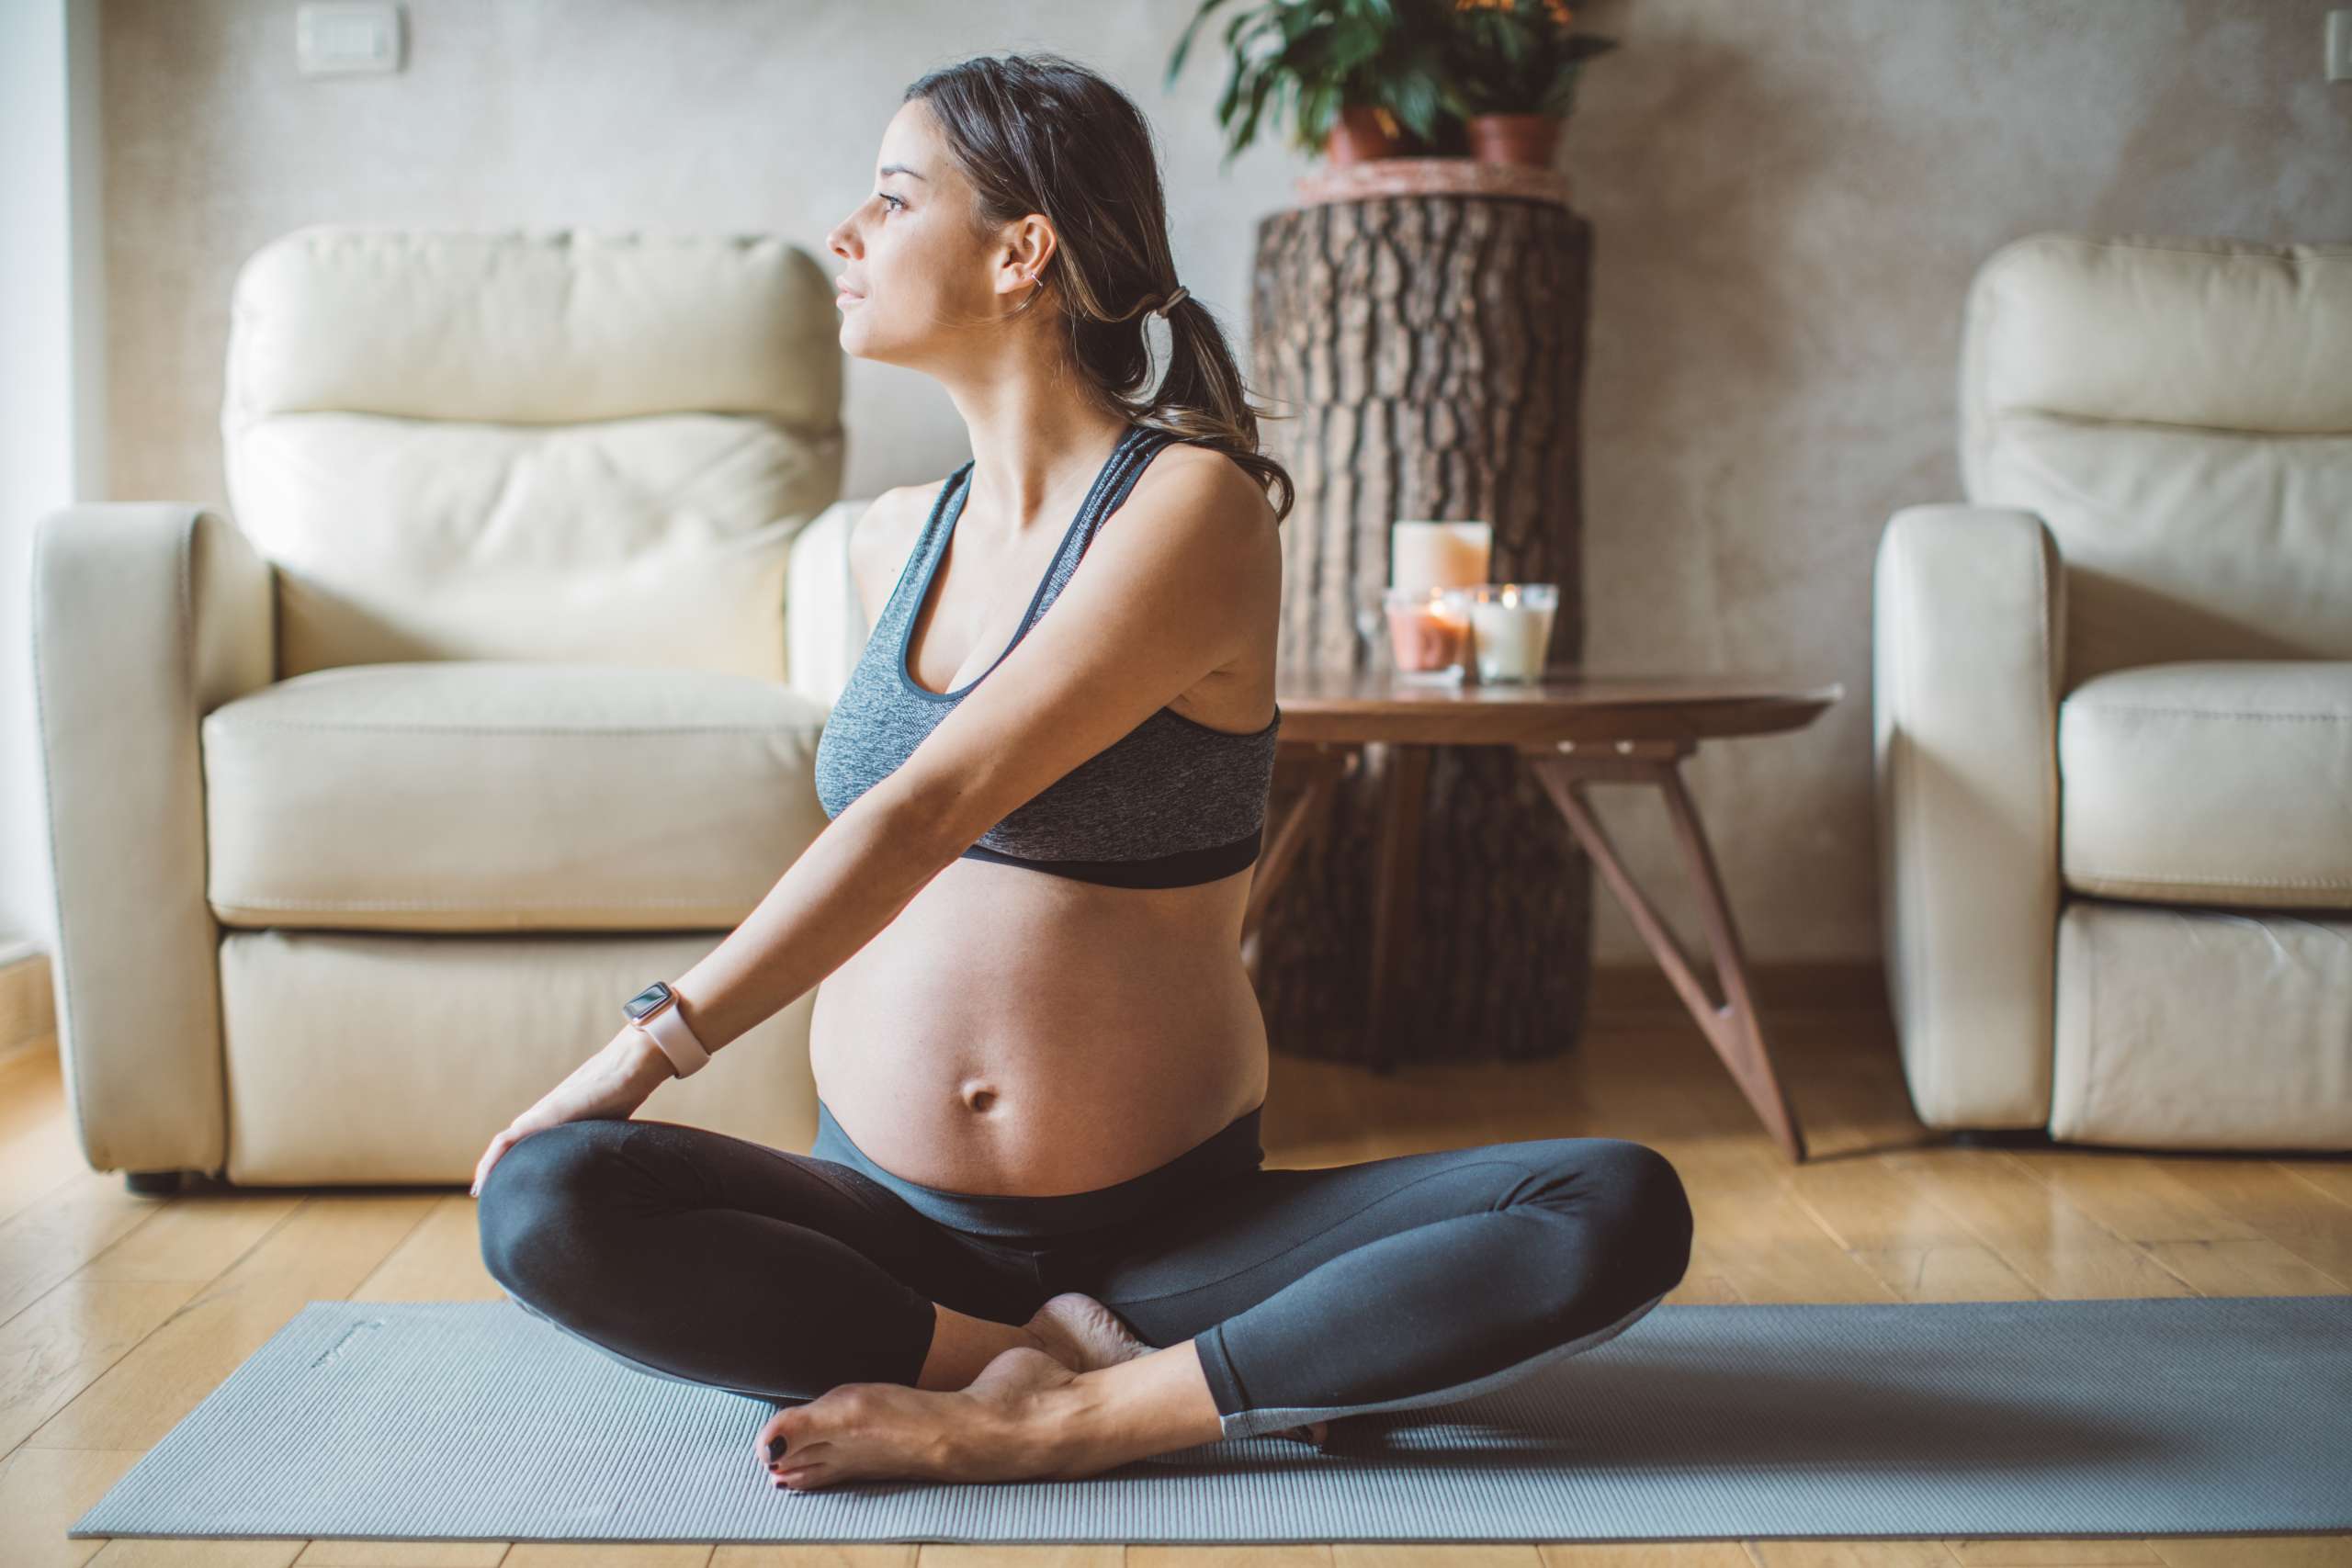 Pregnant woman exercise yoga-Pregnancy And Mental Health